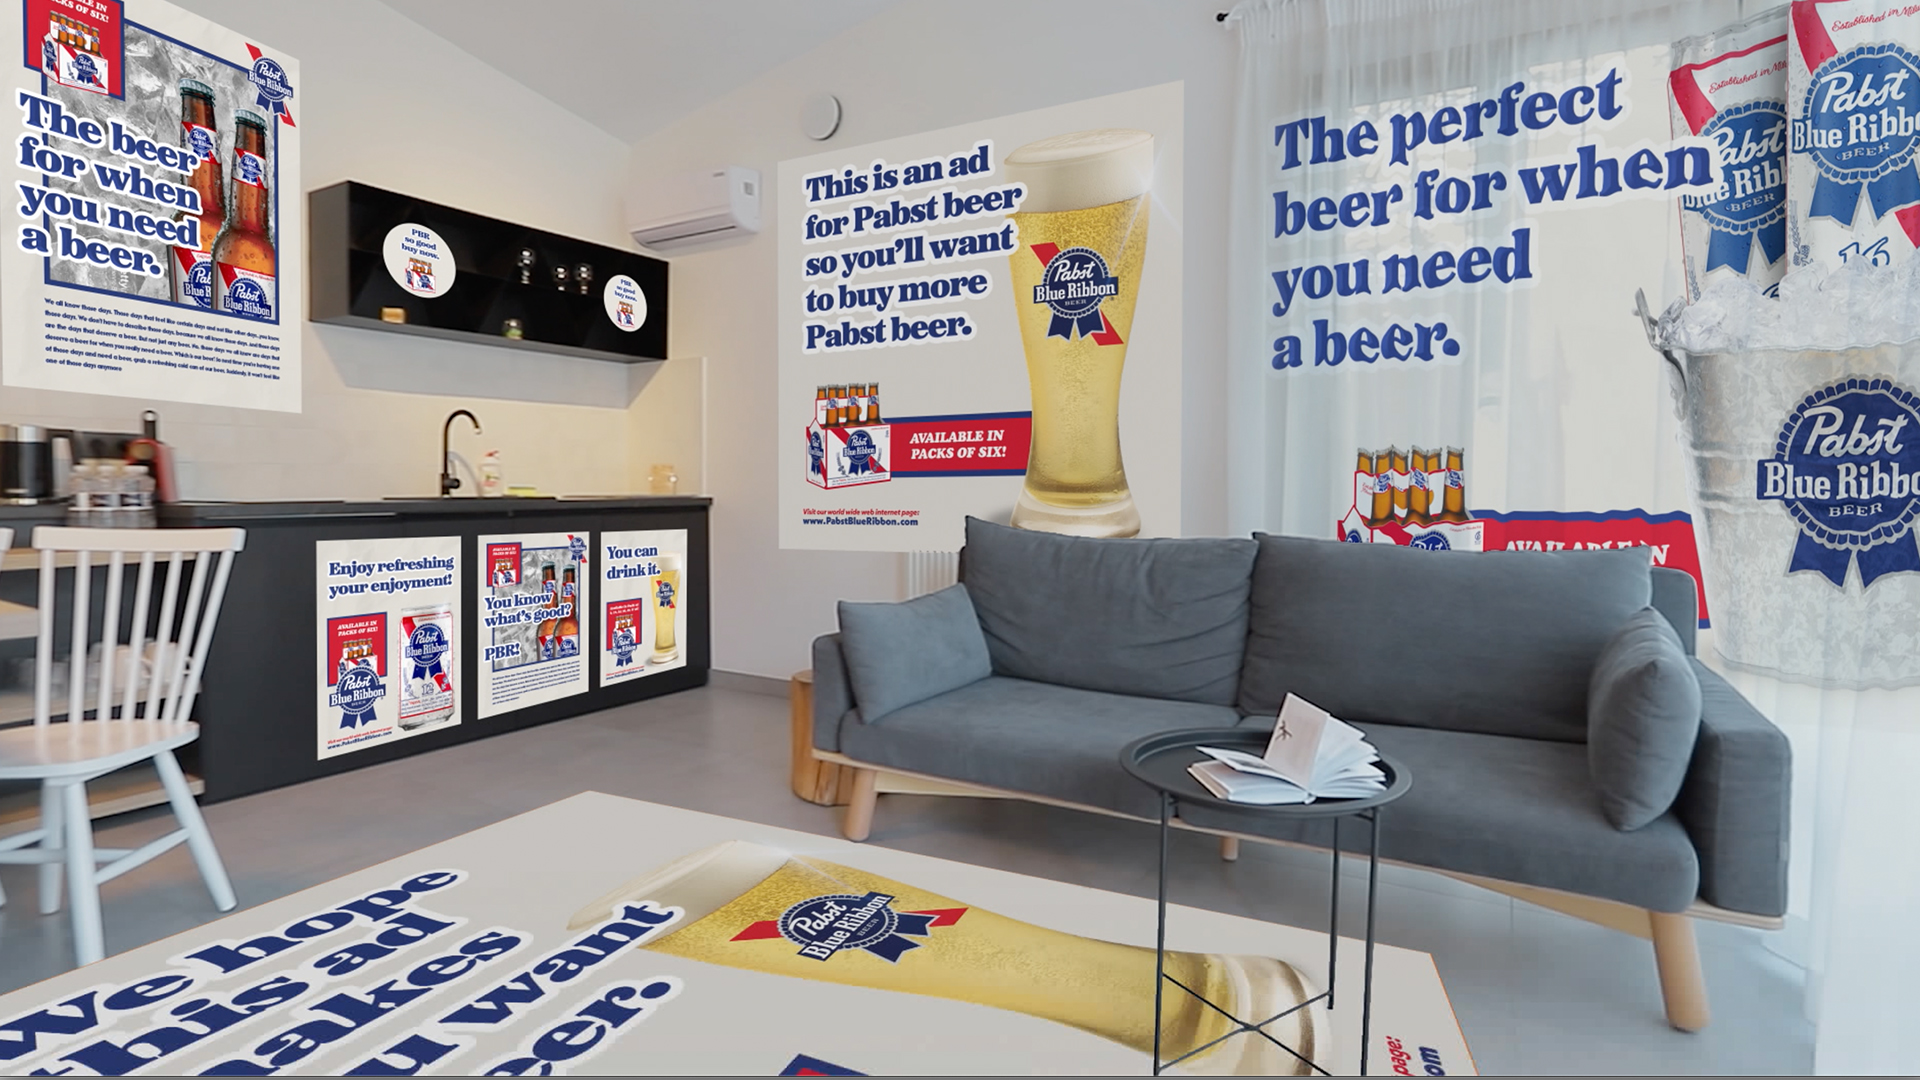 Pabst Blue Ribbon is looking for ad space inside your home. (image courtesy of Pabst Blue Ribbon)